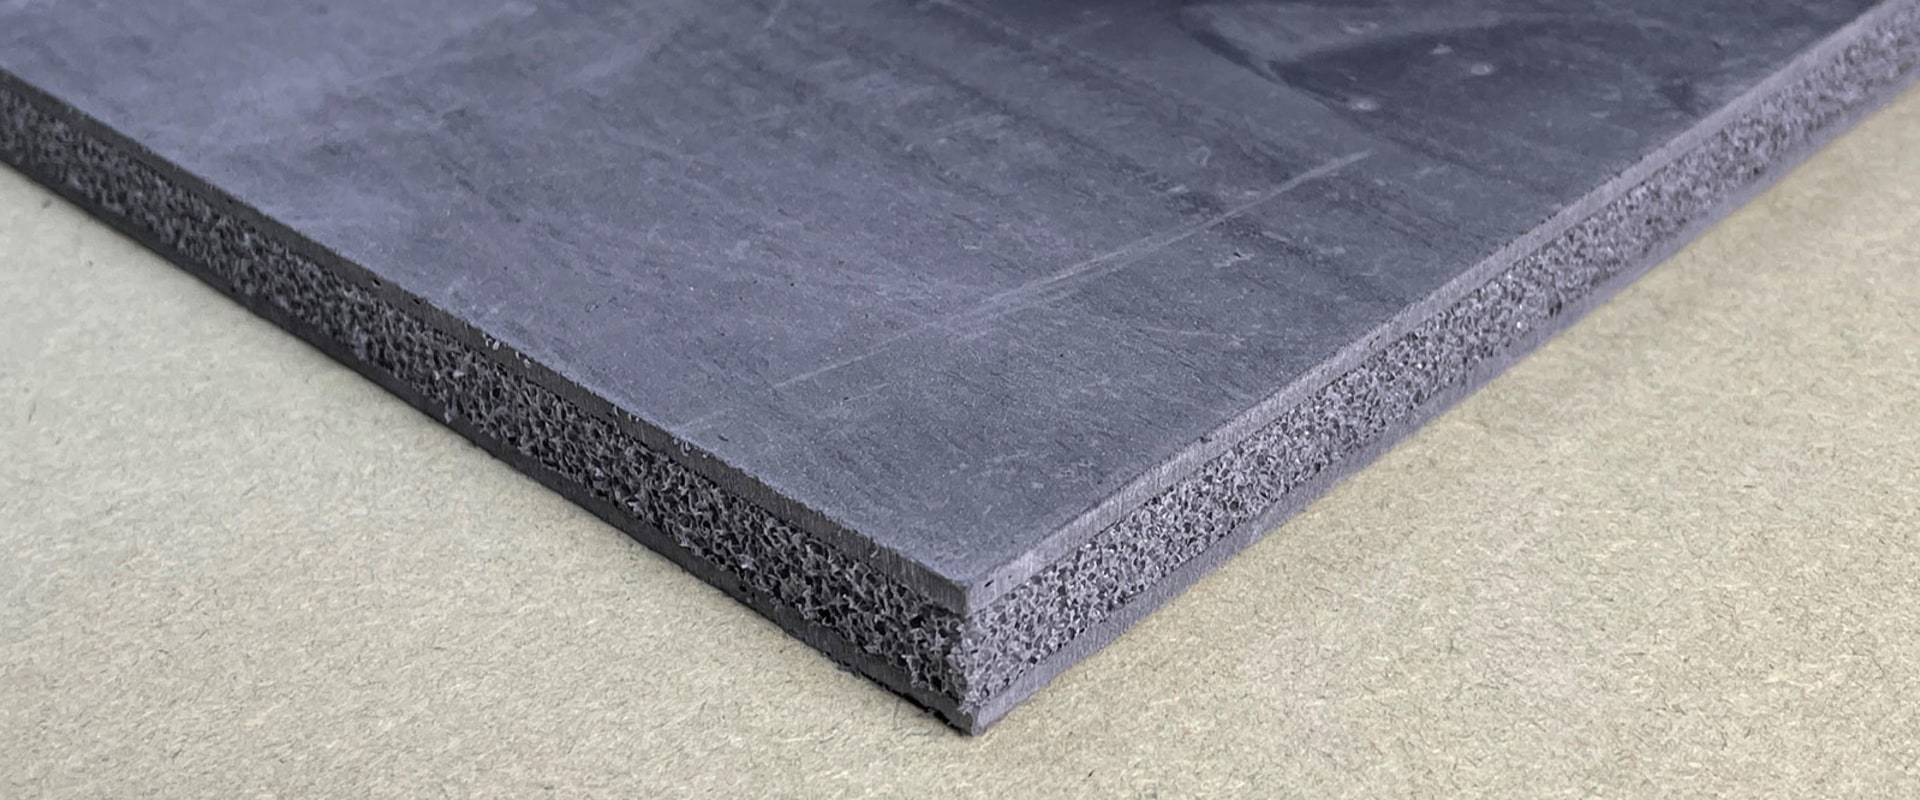 Is Soundproof Underlay Easy to Install?